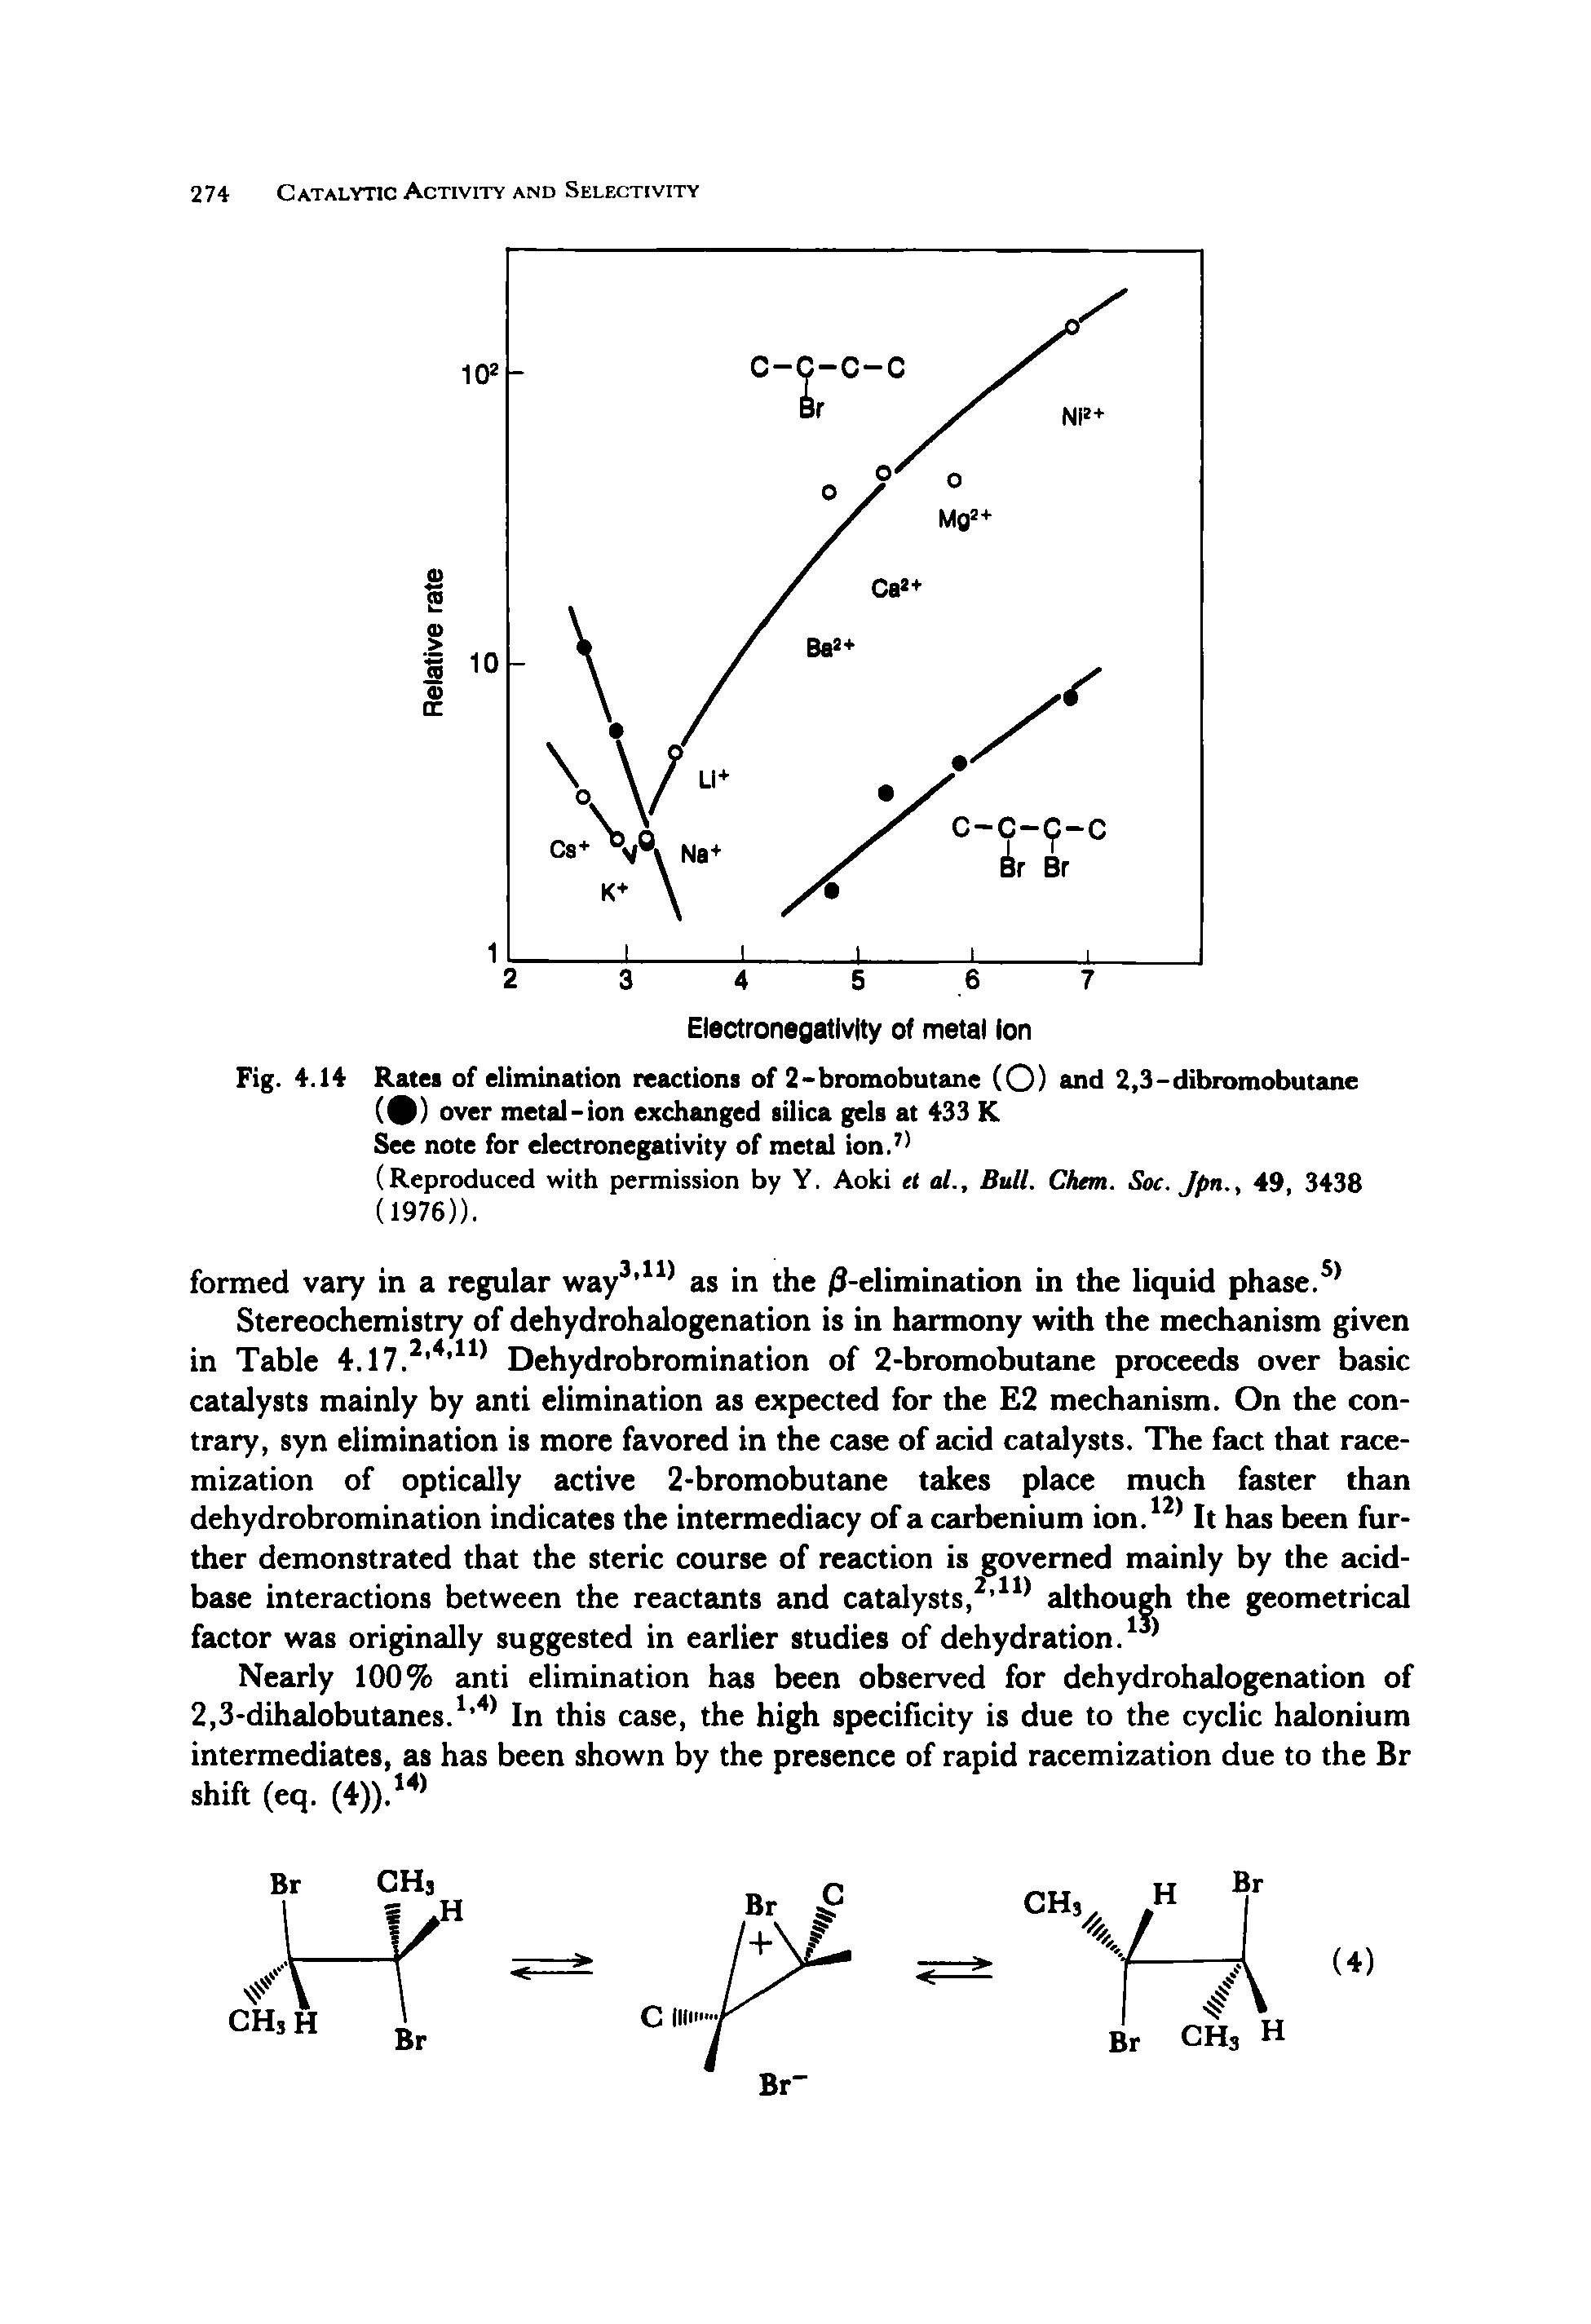 Fig. 4.14 Ratei of elimination reactions of 2-bromobutan (O) and 2,3-dibromobutane (9) over metal-ion exchanged silica gels at 433 K See note for electronegativity of metal ion. )...